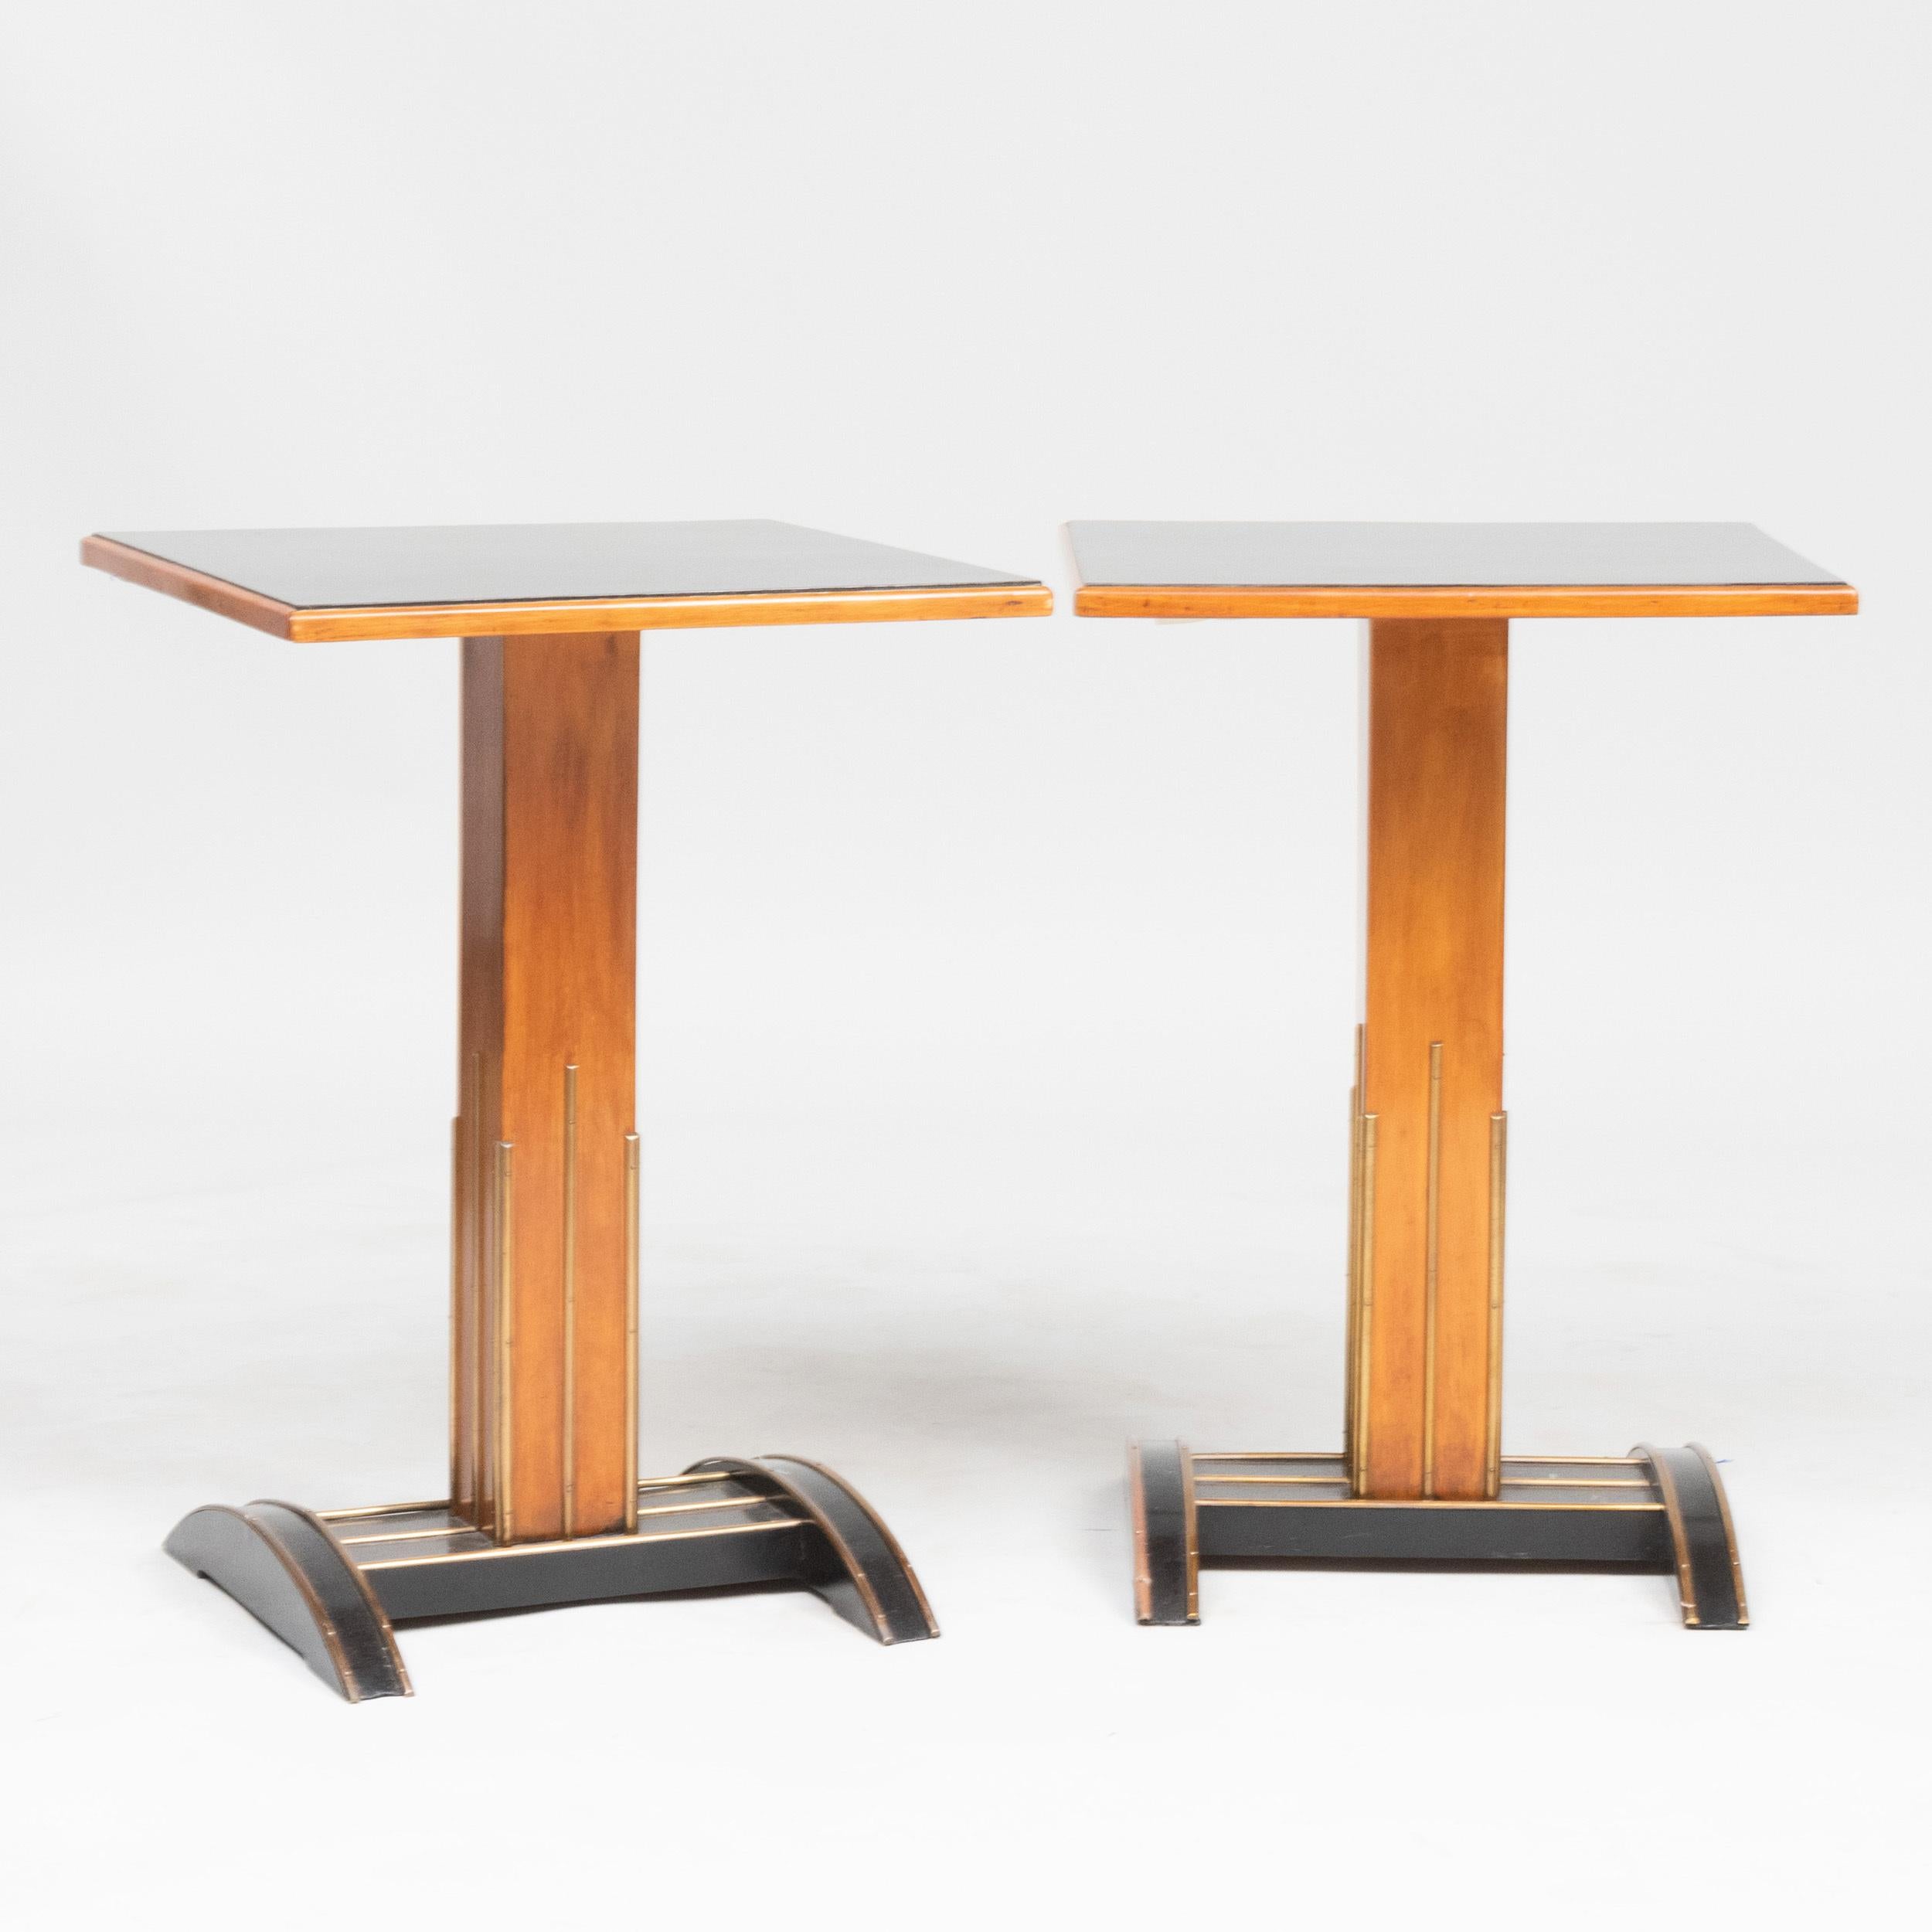 Pair of Viennese brass-mounted ebonized fruitwood side tables.